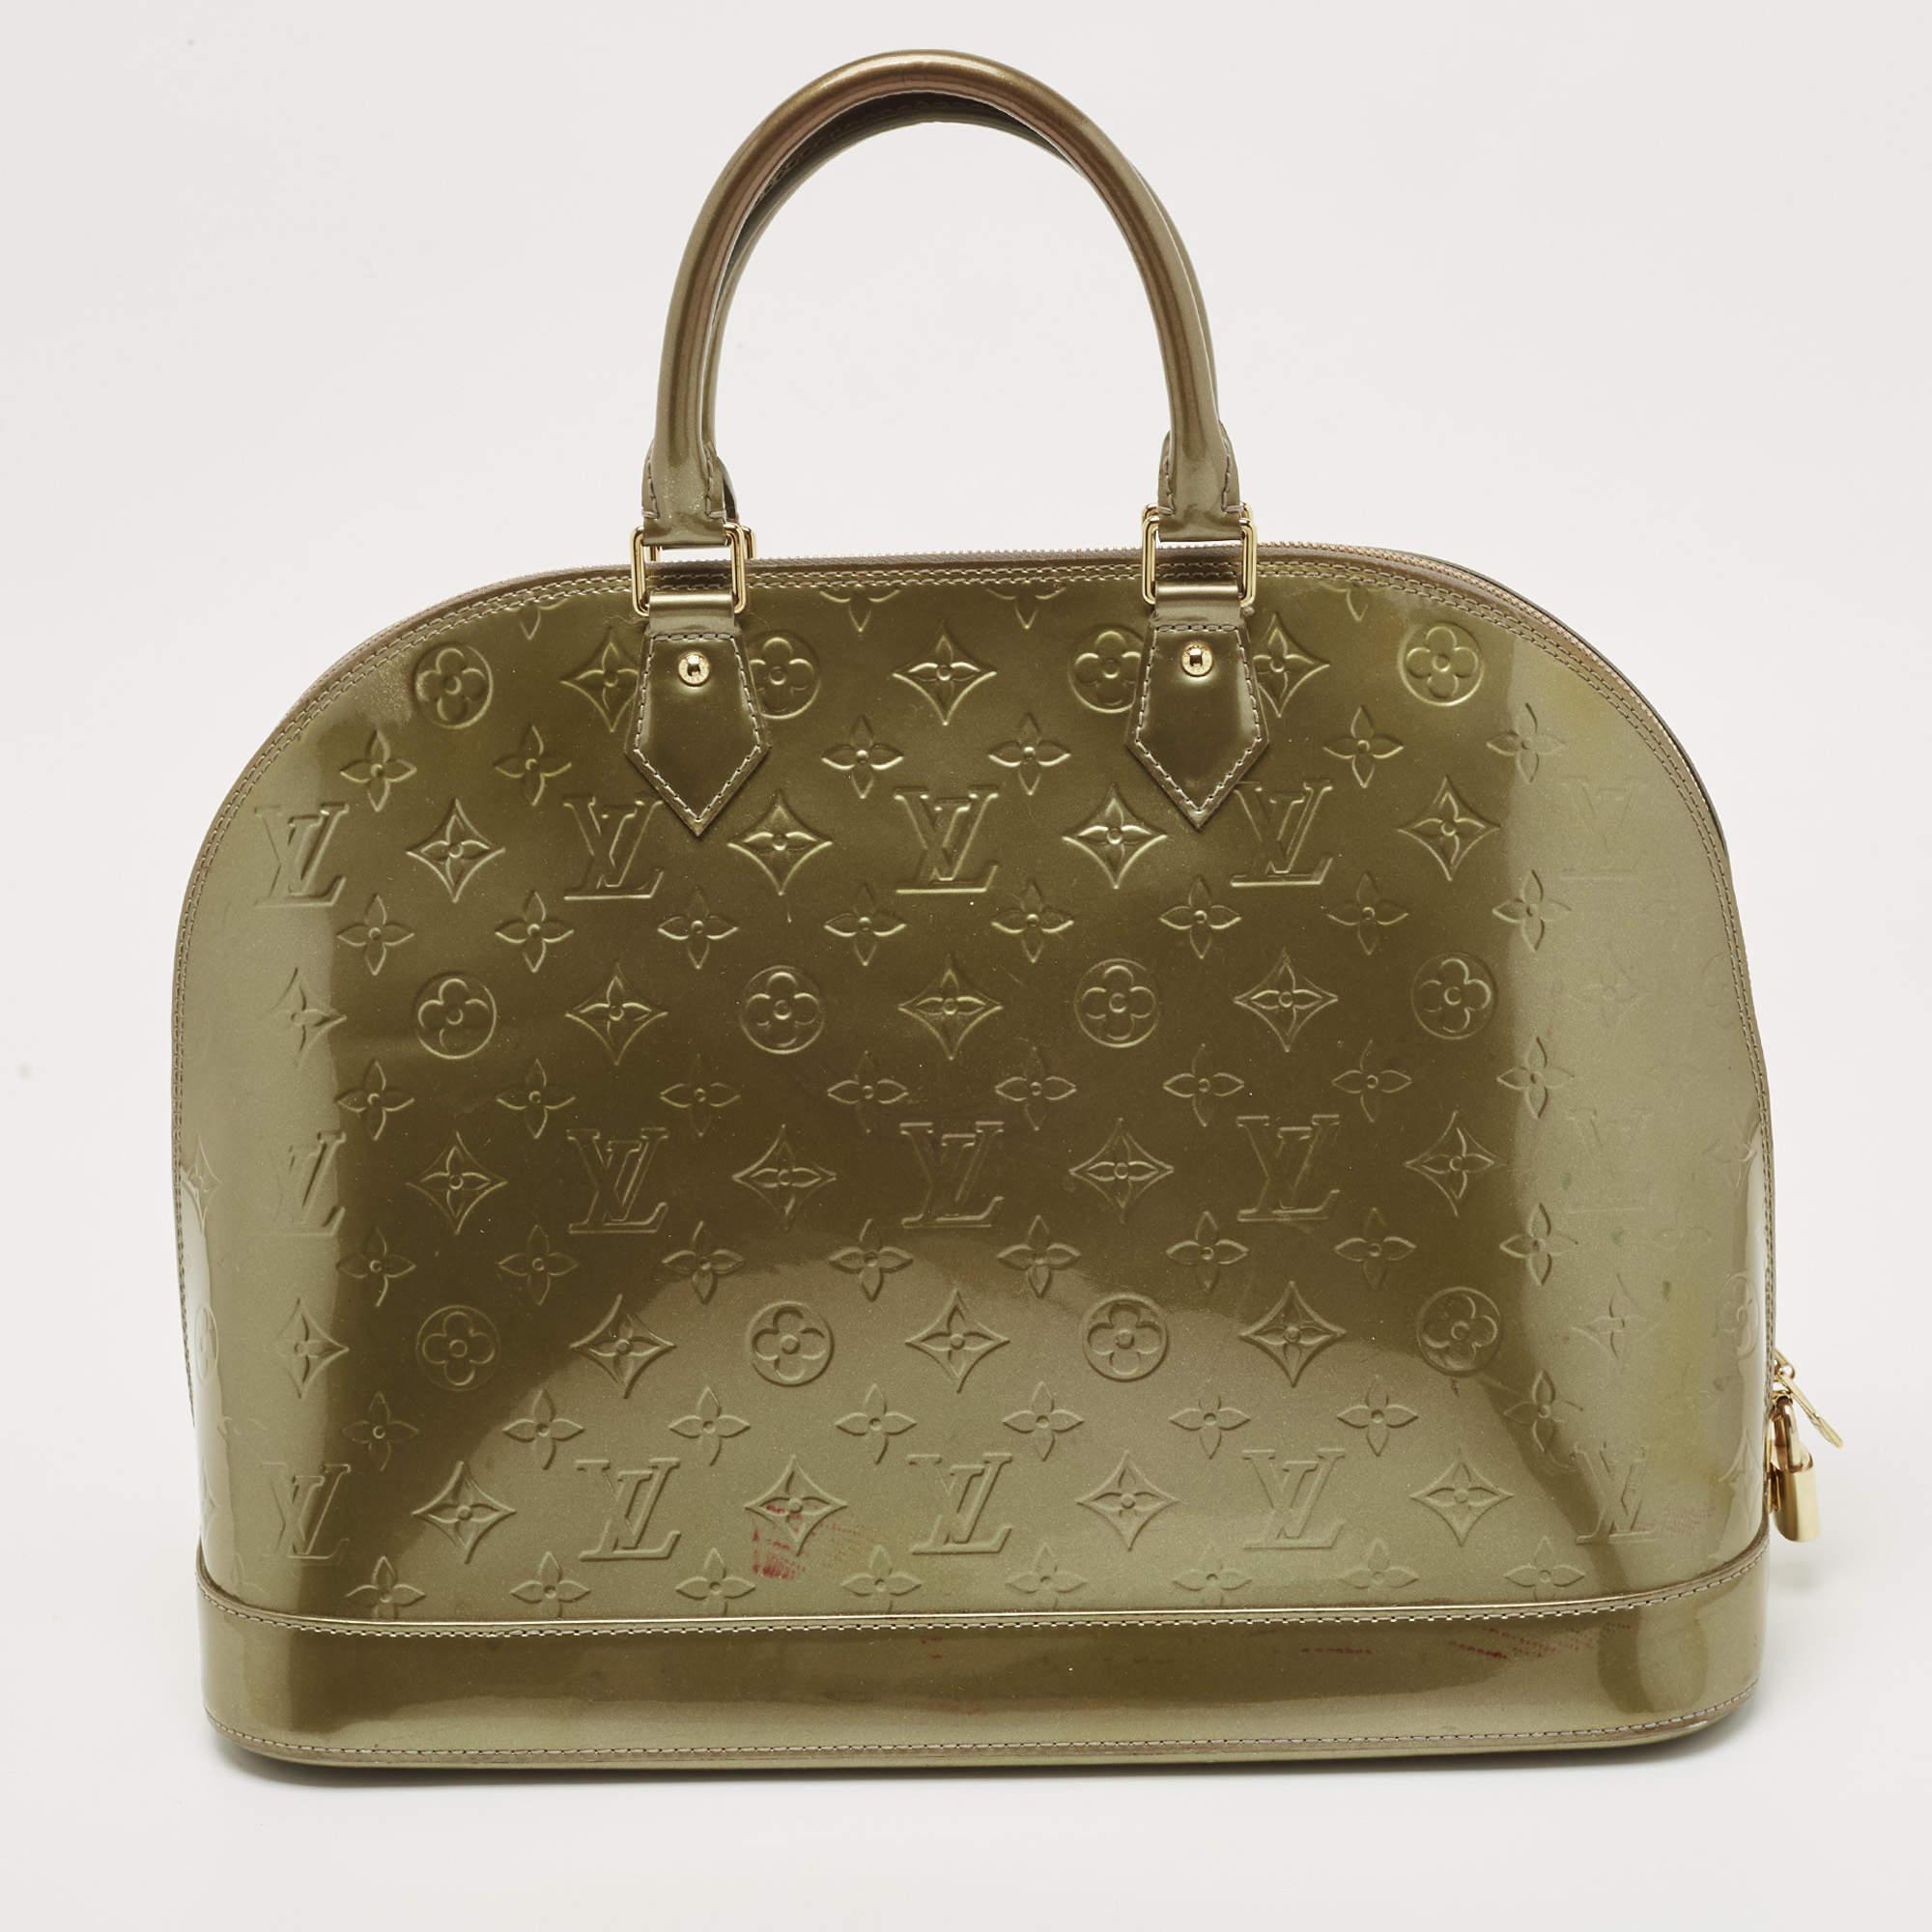 From one of the most iconic collections of Louis Vuitton, this Alma bag is imbued with exquisite craftsmanship and historic details. Constructed from Vert Olive Monogram Vernis leather, it displays dual handles at the top, gold-tone hardware, and a